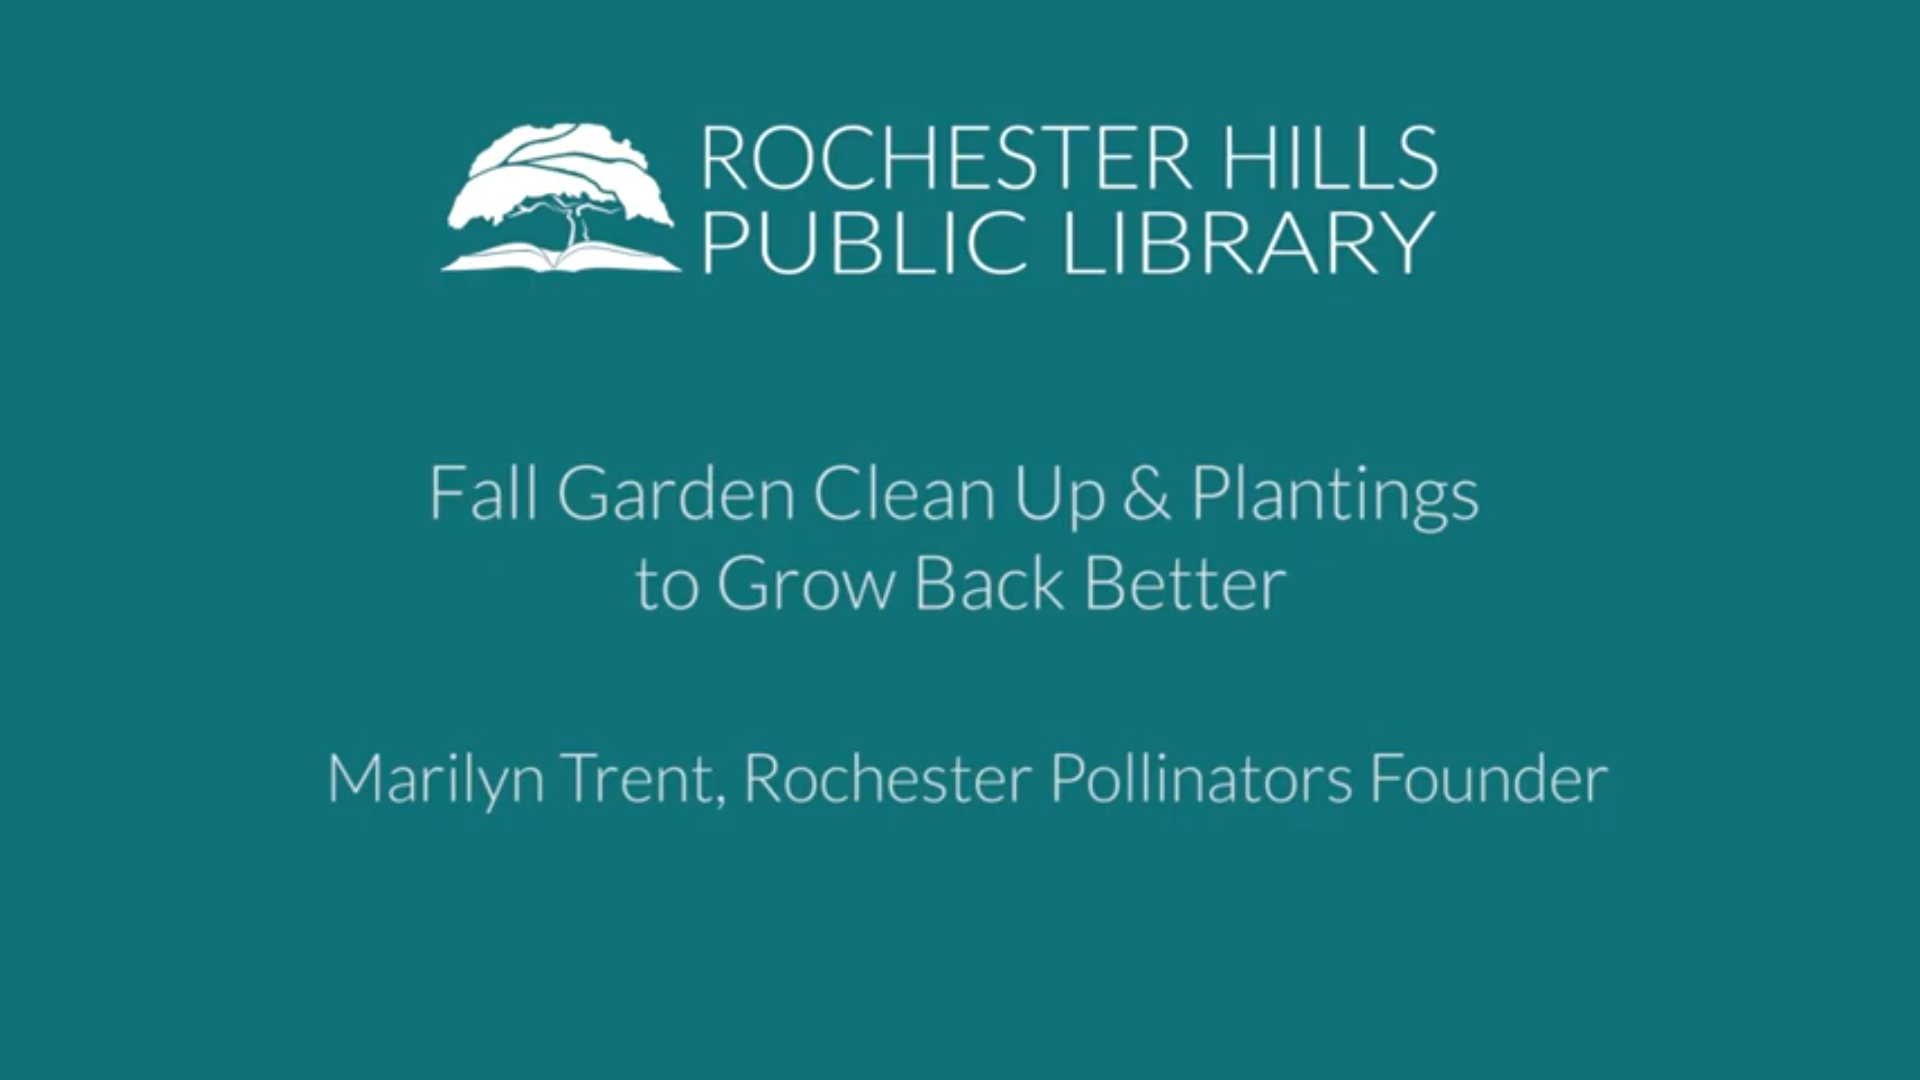 Fall Garden Clean Up & Plantings to Grow Back Better